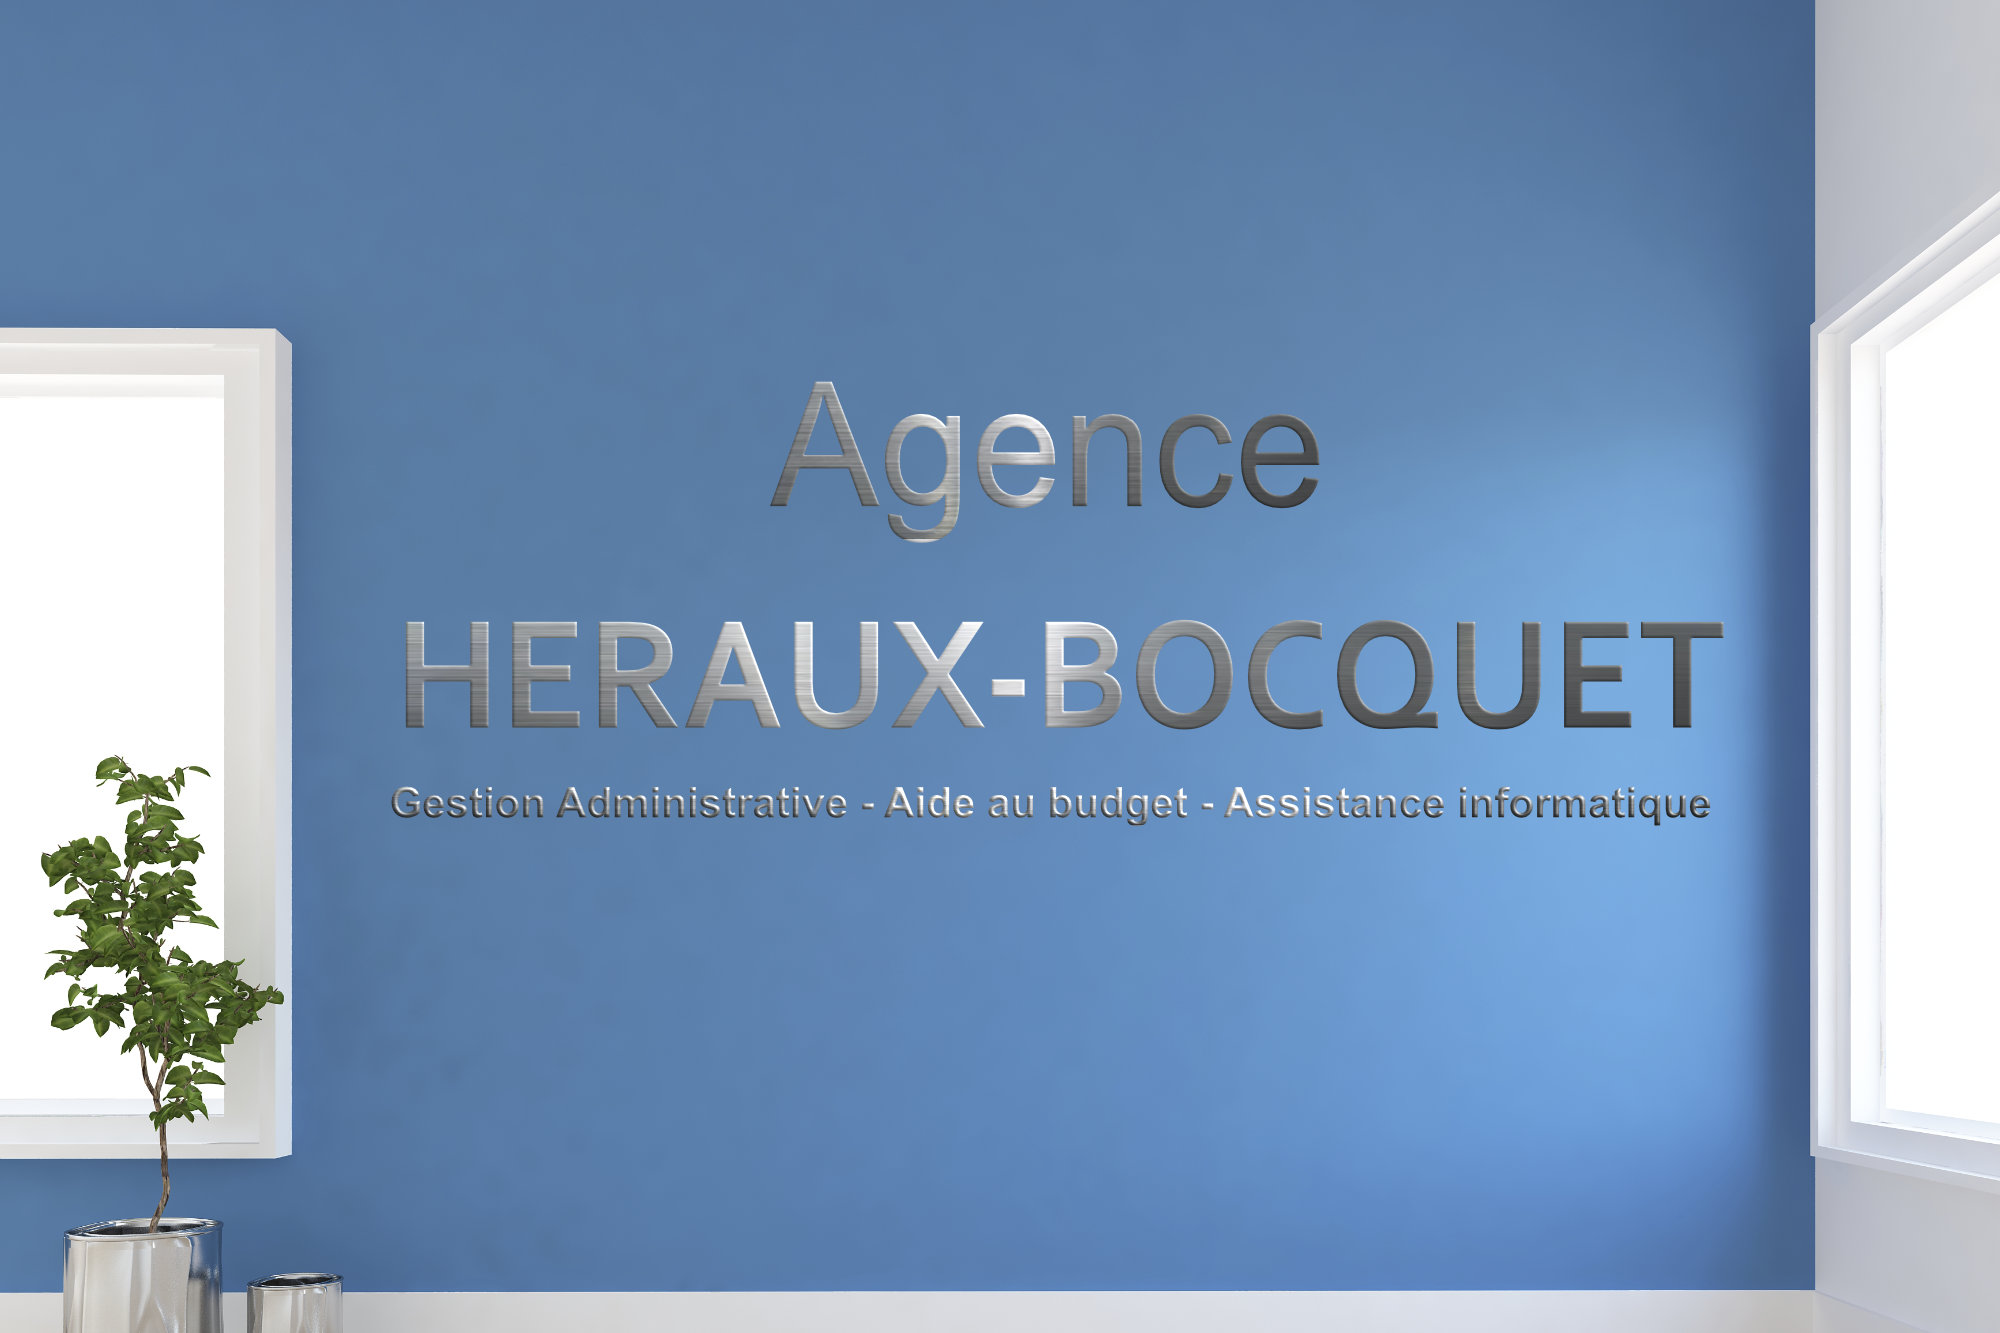 Agence HERAUX-BOCQUET - Gestion Administrative